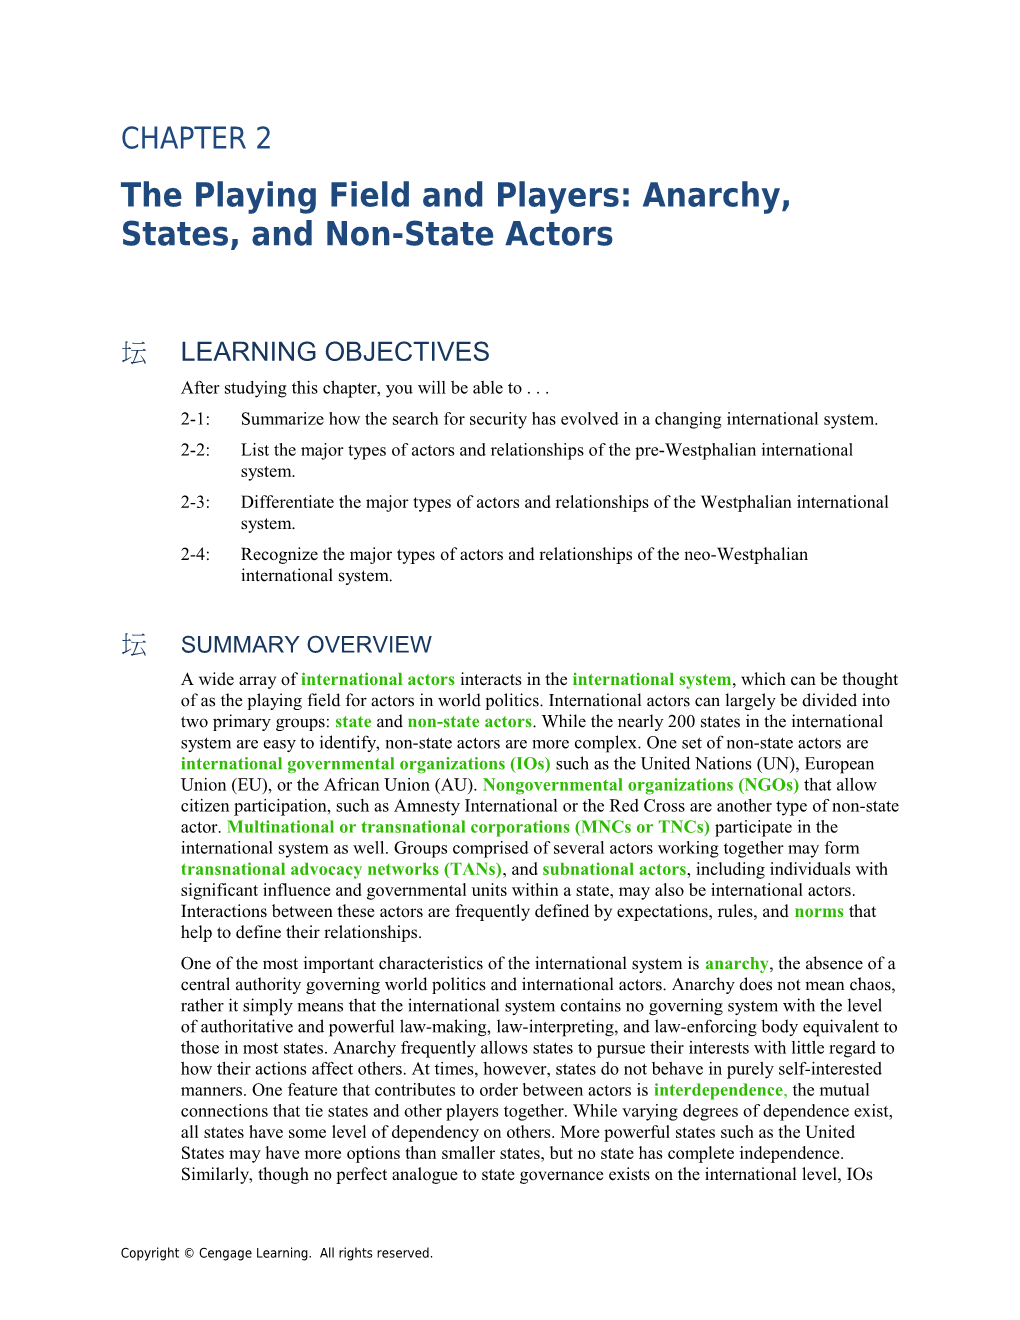 The Playing Field and Players: Anarchy, States, and Non-State Actors